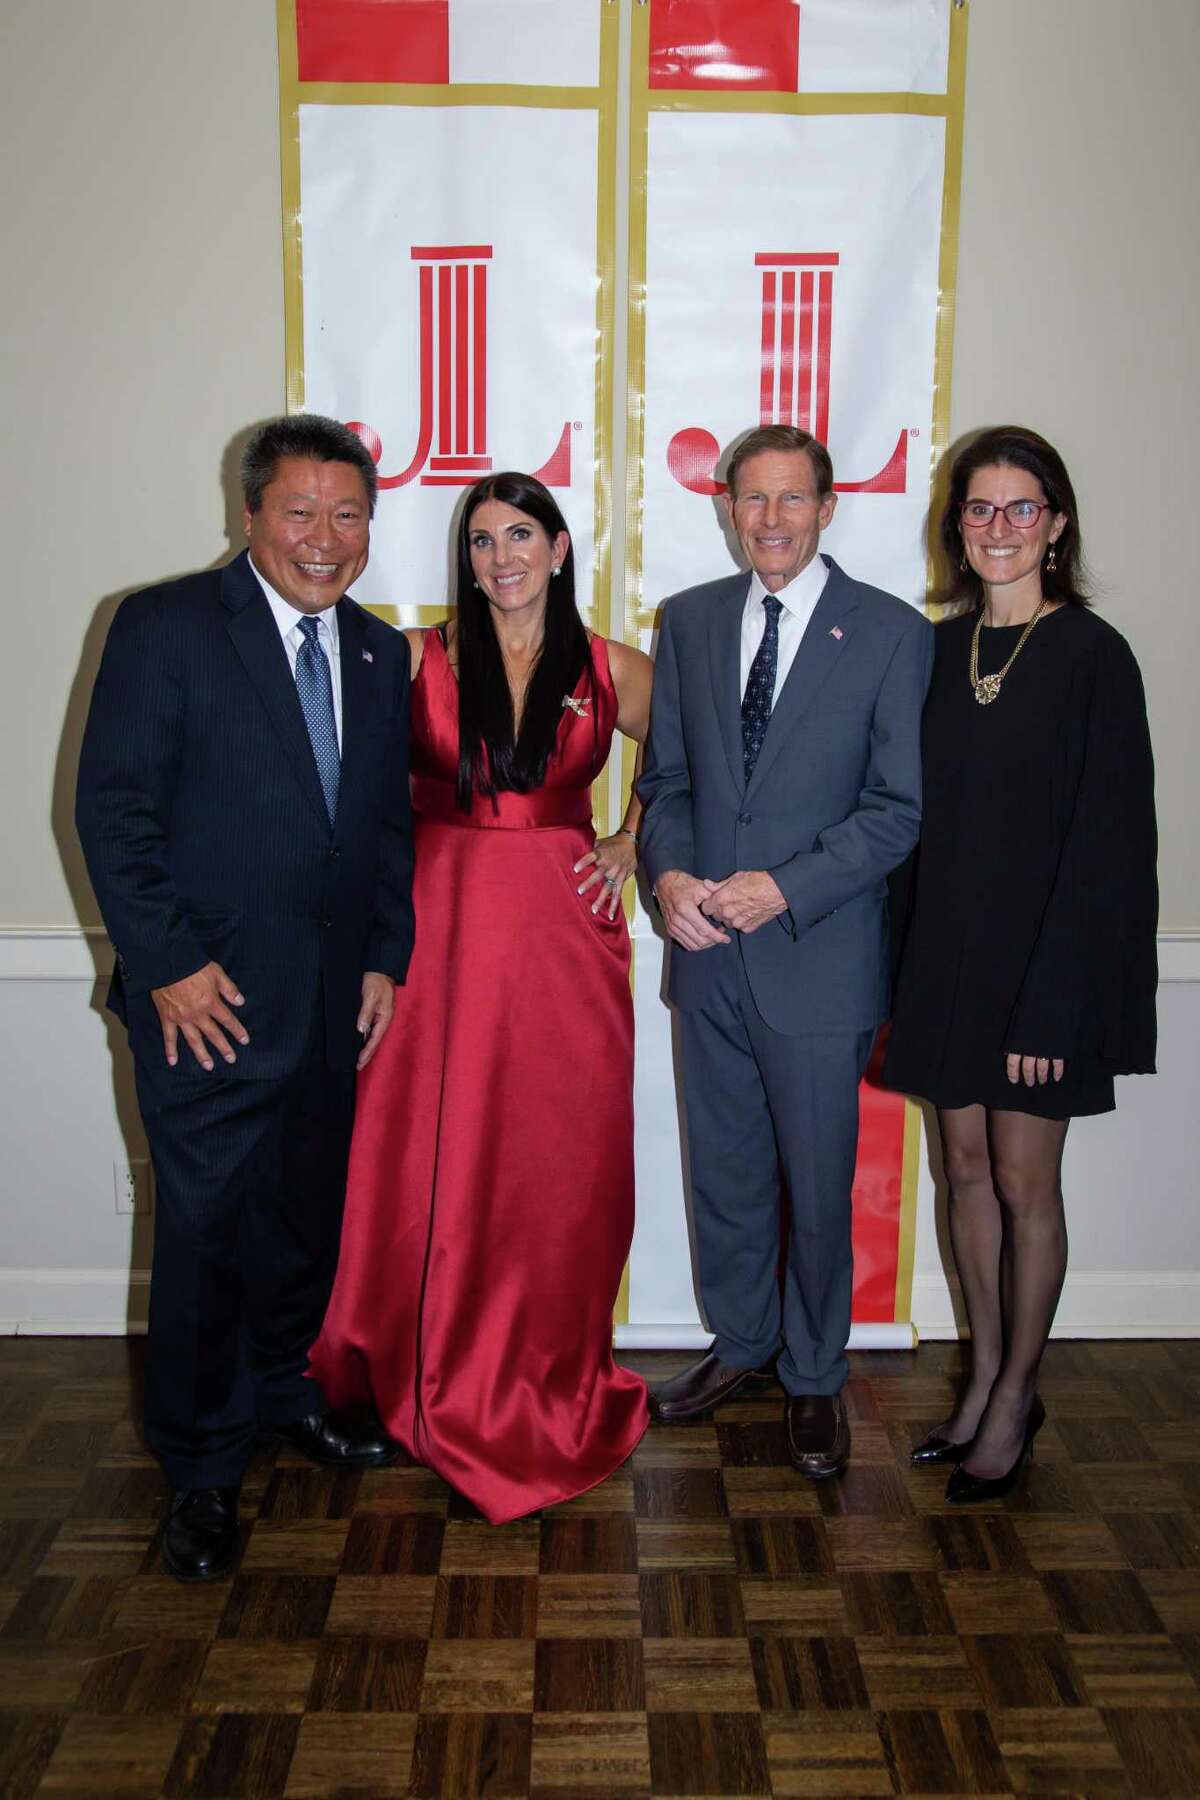 Members of the Junior League of Eastern Fairfield County recently celebrated the group’s centennial. Pictured are state Sen. Tony Hwang, Samantha Collin JLEFC Past President, U.S. Sen. Richard Blumenthal and state Rep. Cristin McCarthy Vahey.